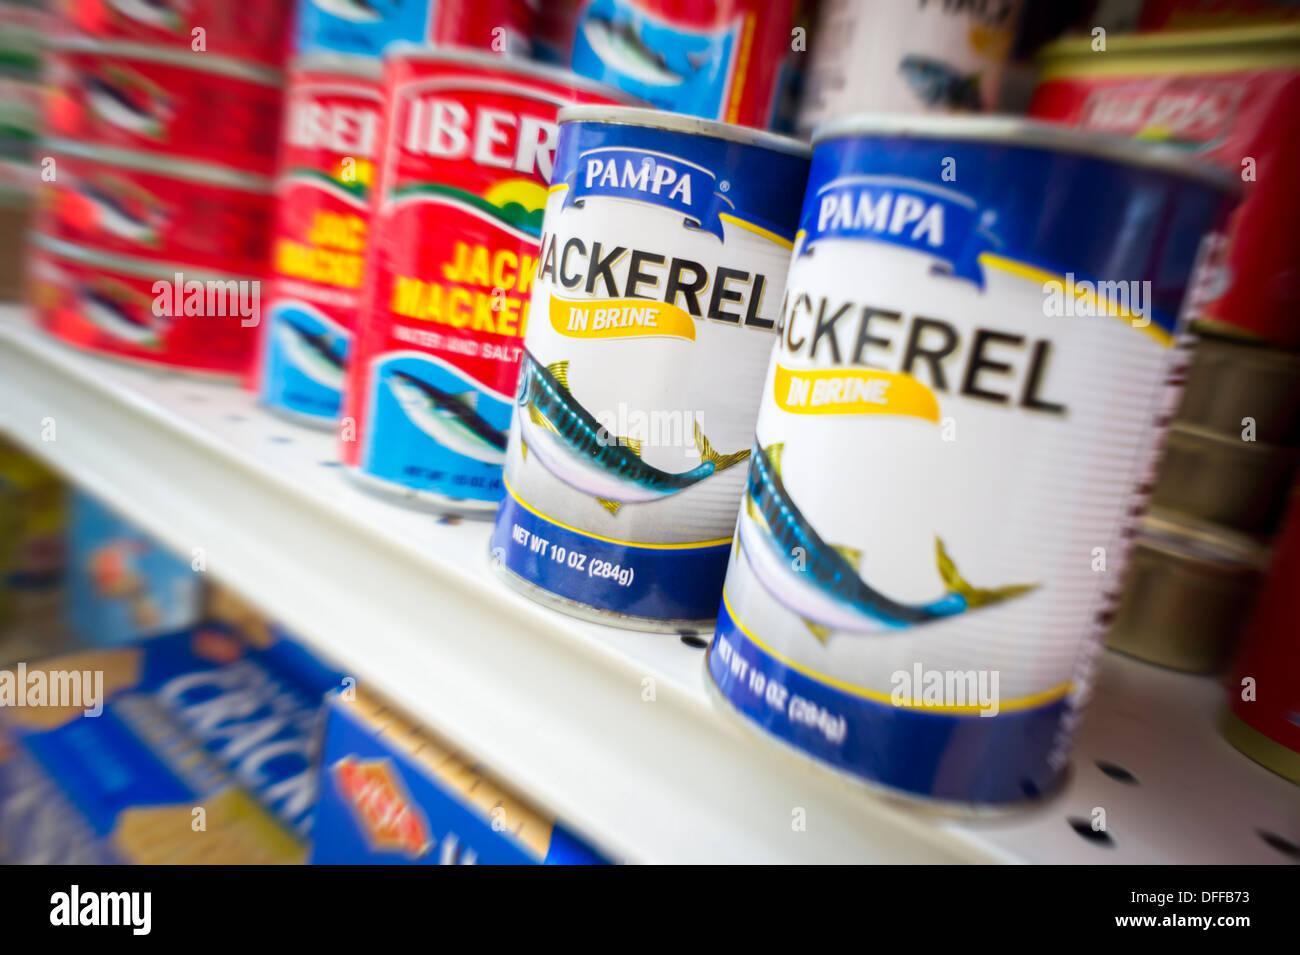 Cans of mackerel in a supermarket in New York on Thursday,October 3, 2013. (© Richard B. Levine) Stock Photo